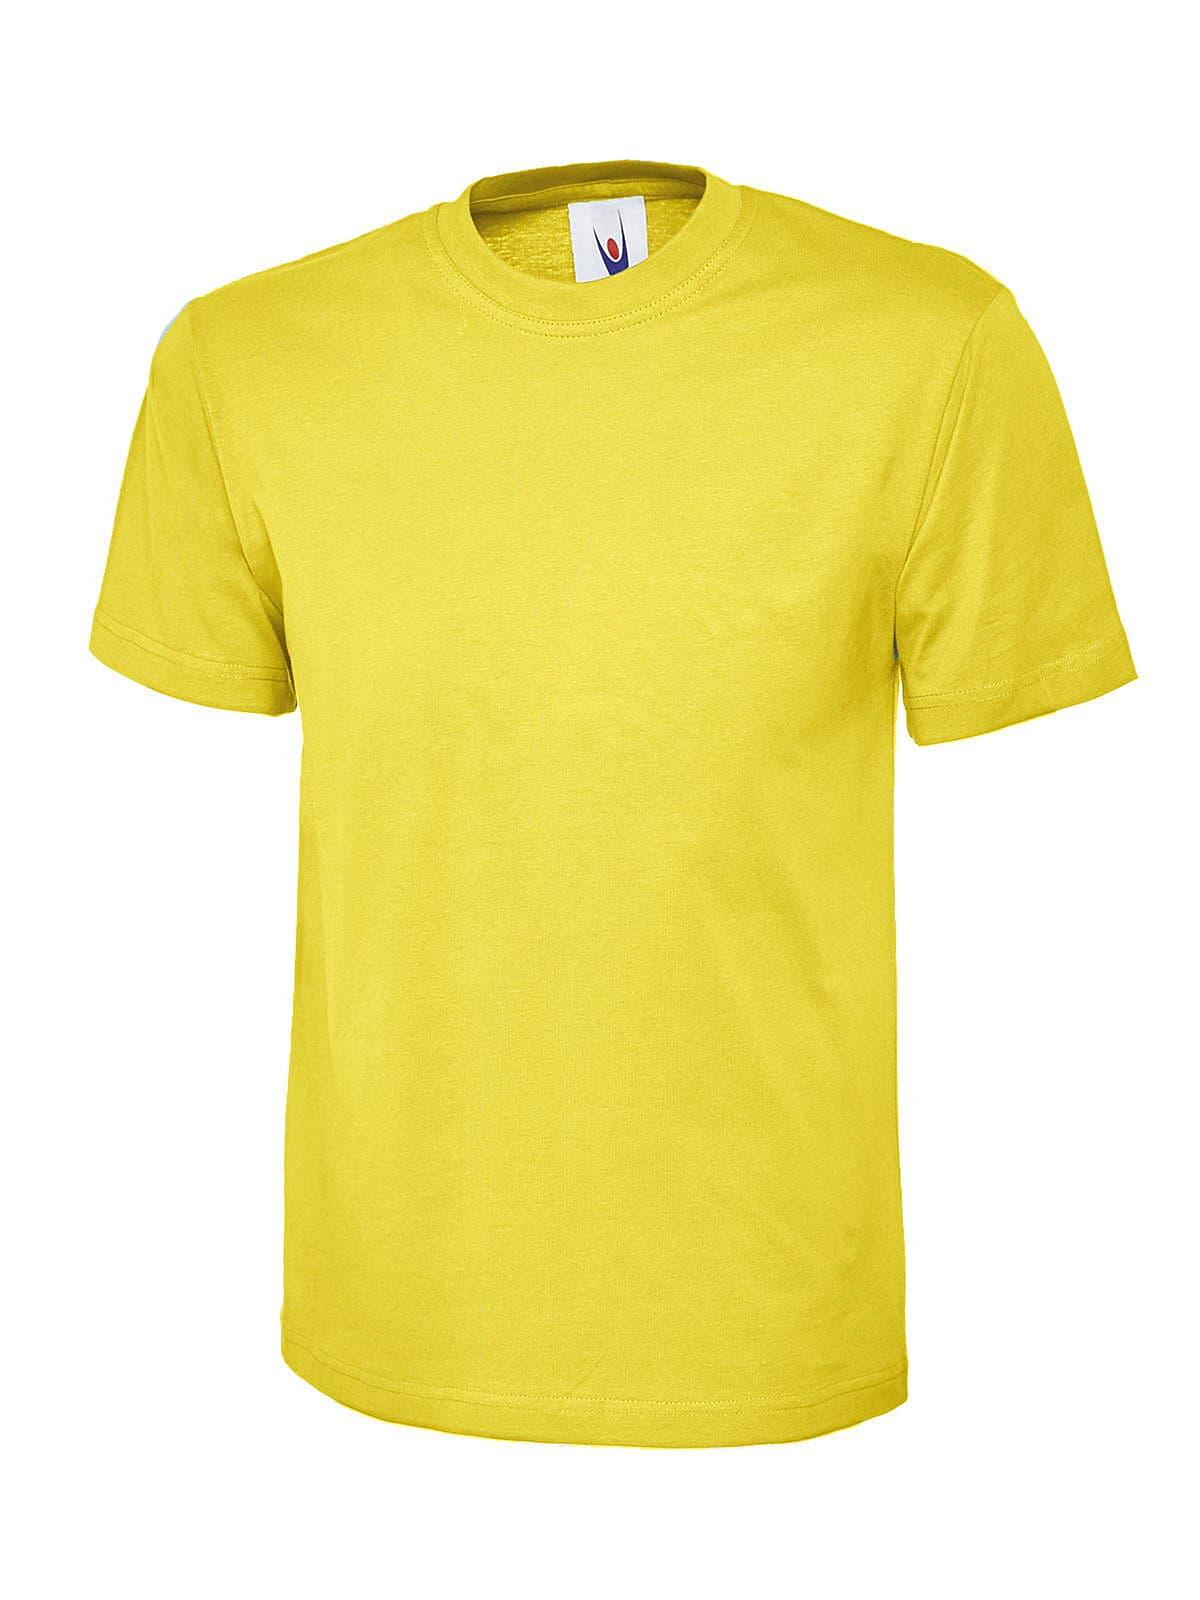 Uneek Childrens 180GSM T-Shirt in Yellow (Product Code: UC306)